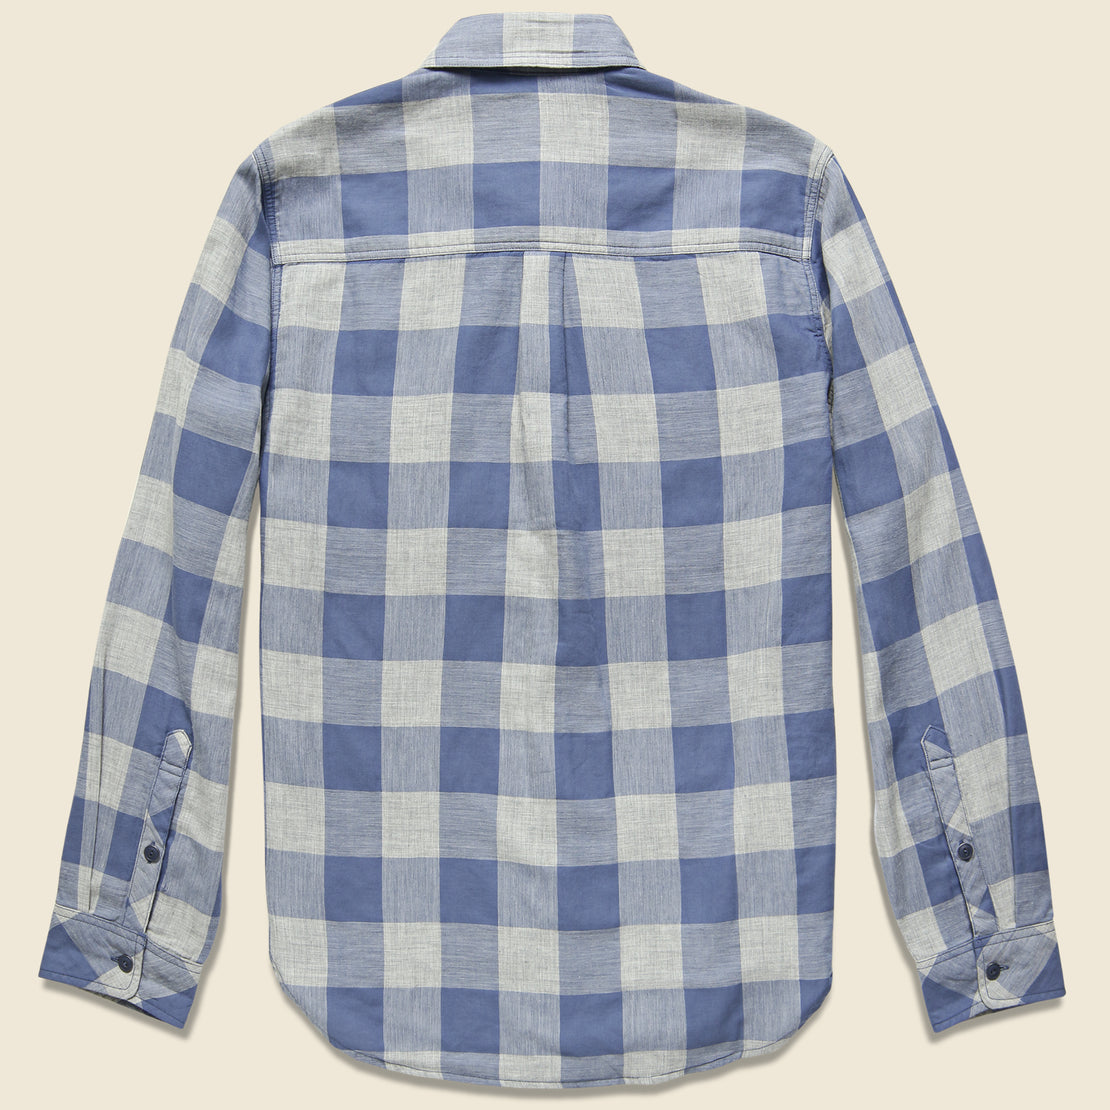 Doublecloth Malibu Shirt - Blue/Grey Buffalo - Faherty - STAG Provisions - W - Tops - L/S Woven